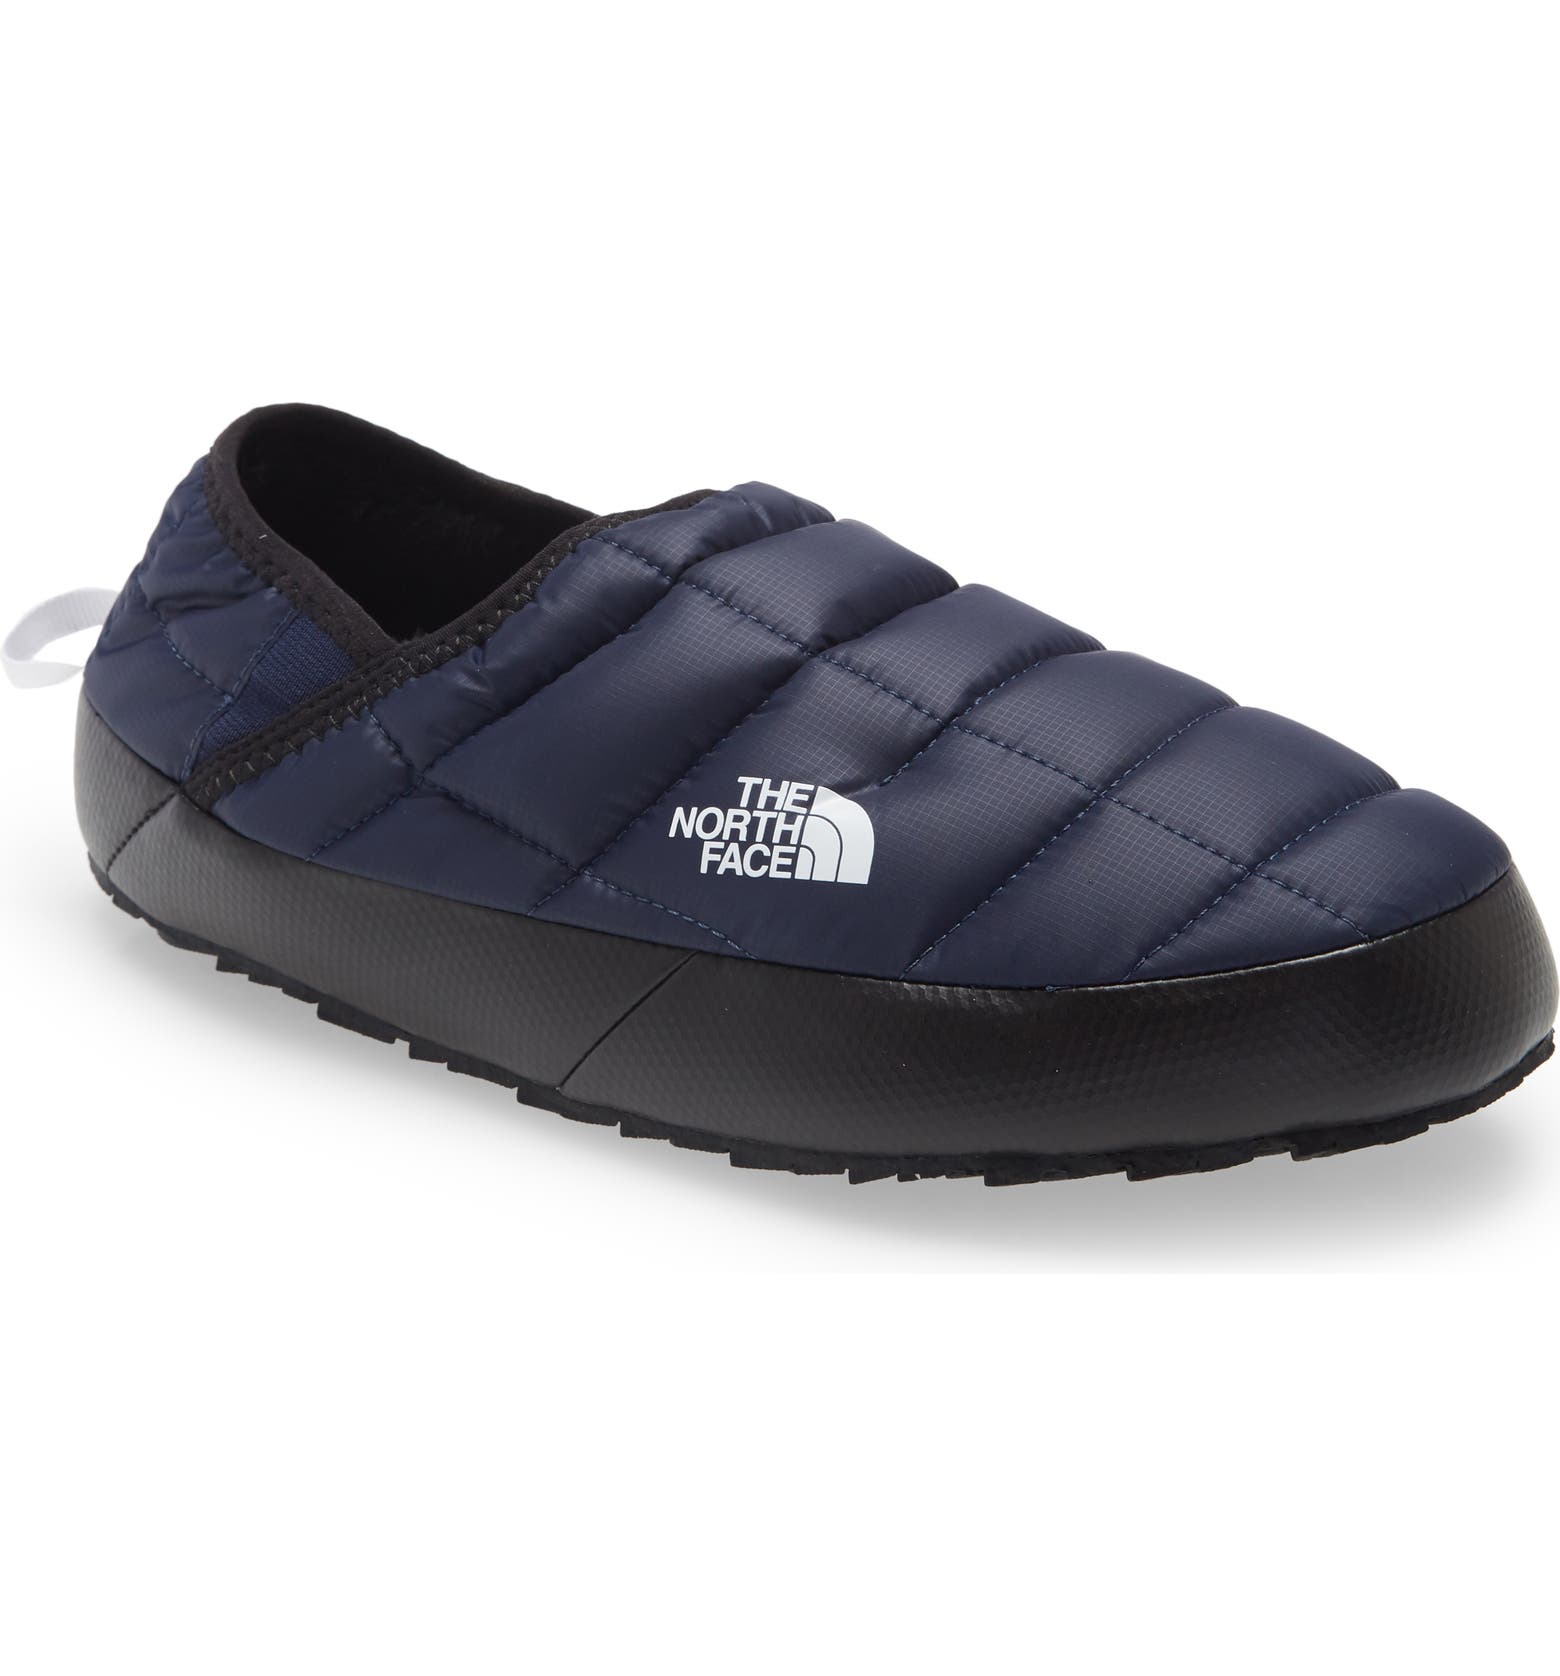 The North Face ThermoBall™ Traction Water Resistant Slipper $39.9